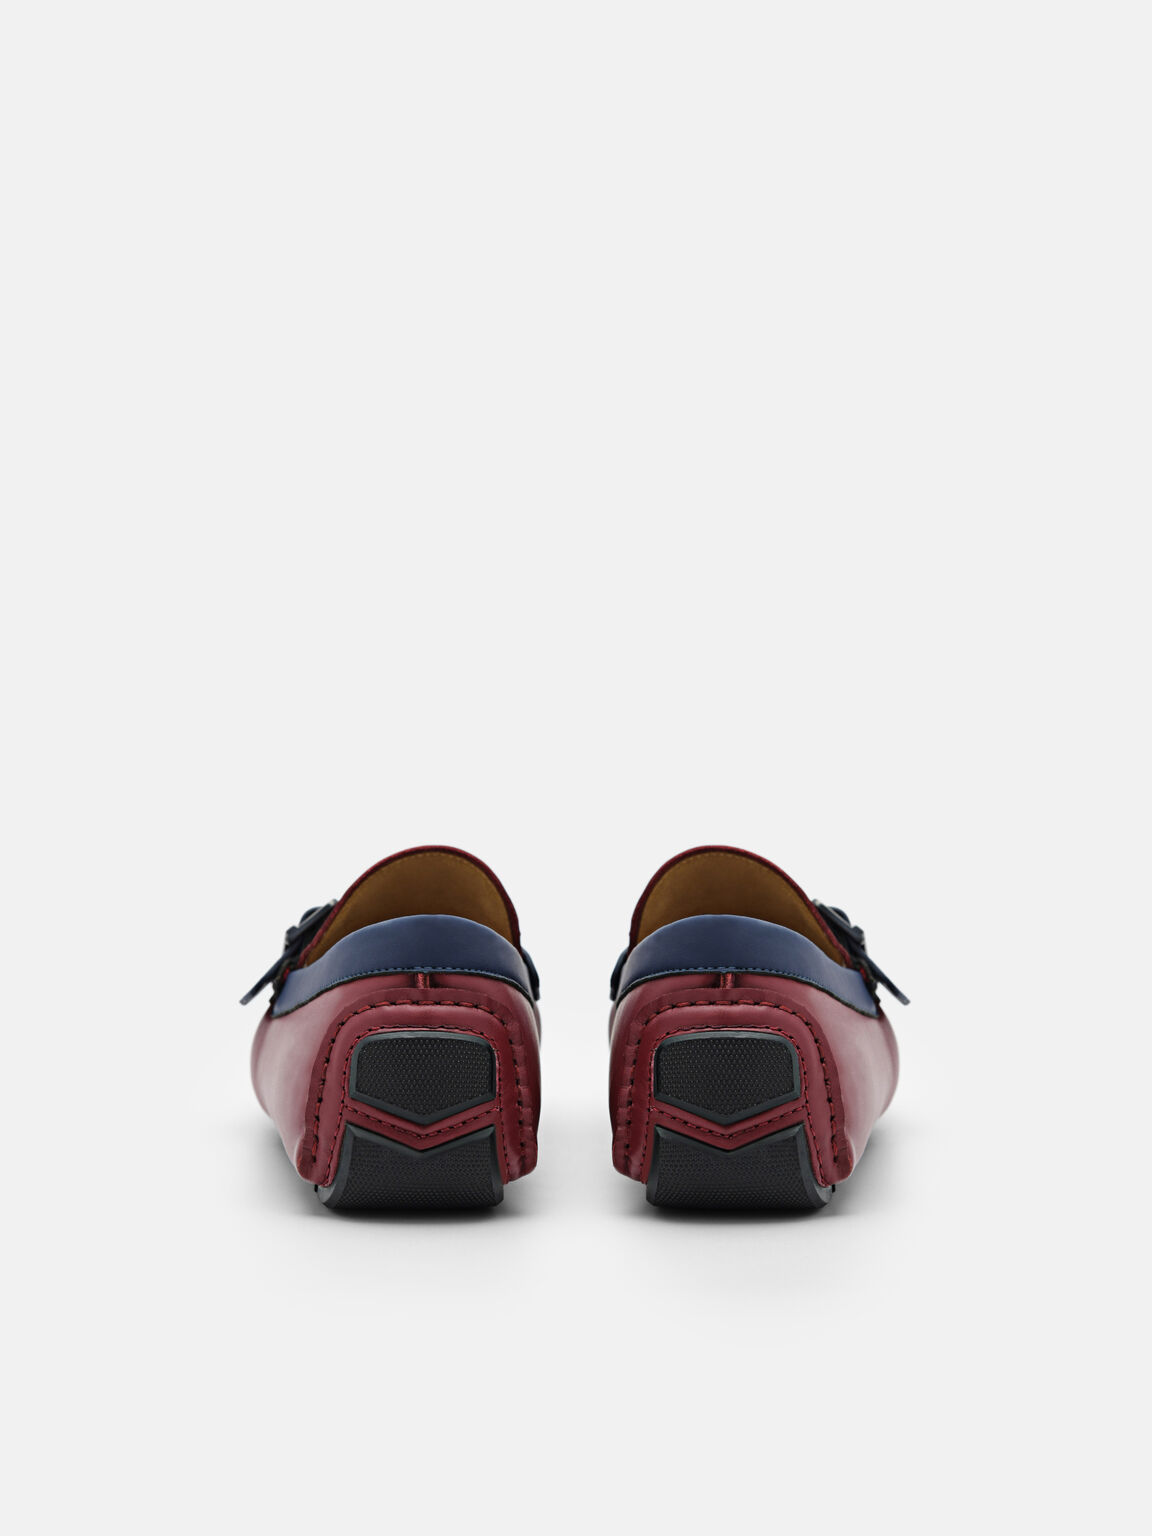 Ripley Leather Driving Shoes, Maroon